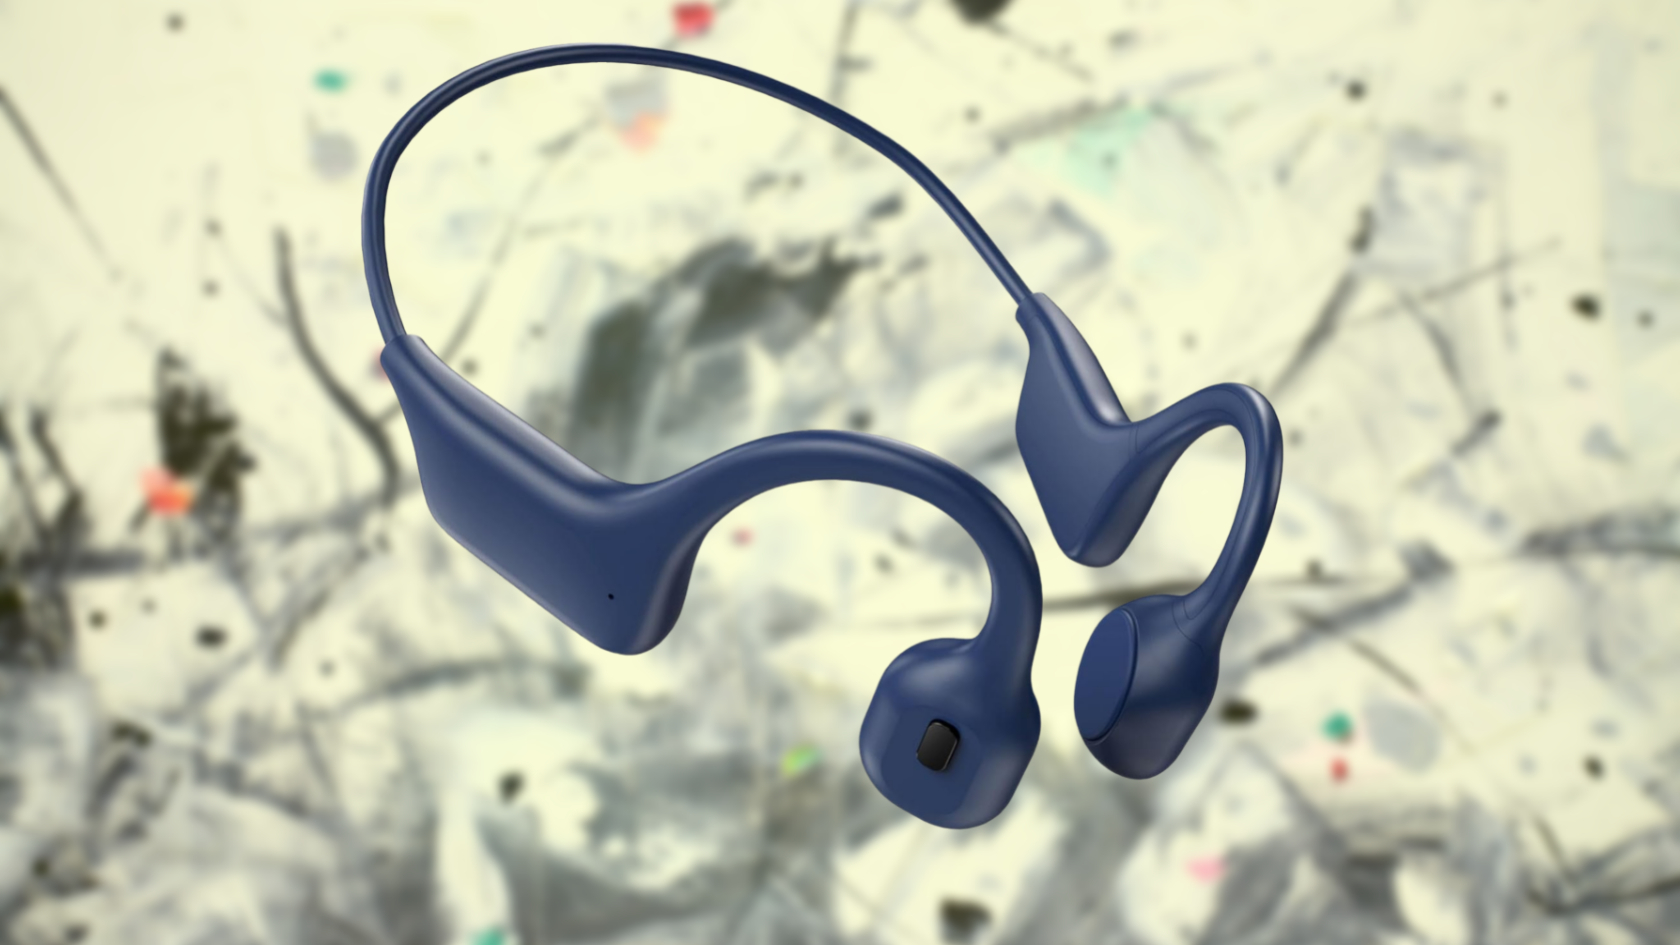 A blue earphone with a splatter of paint on it.